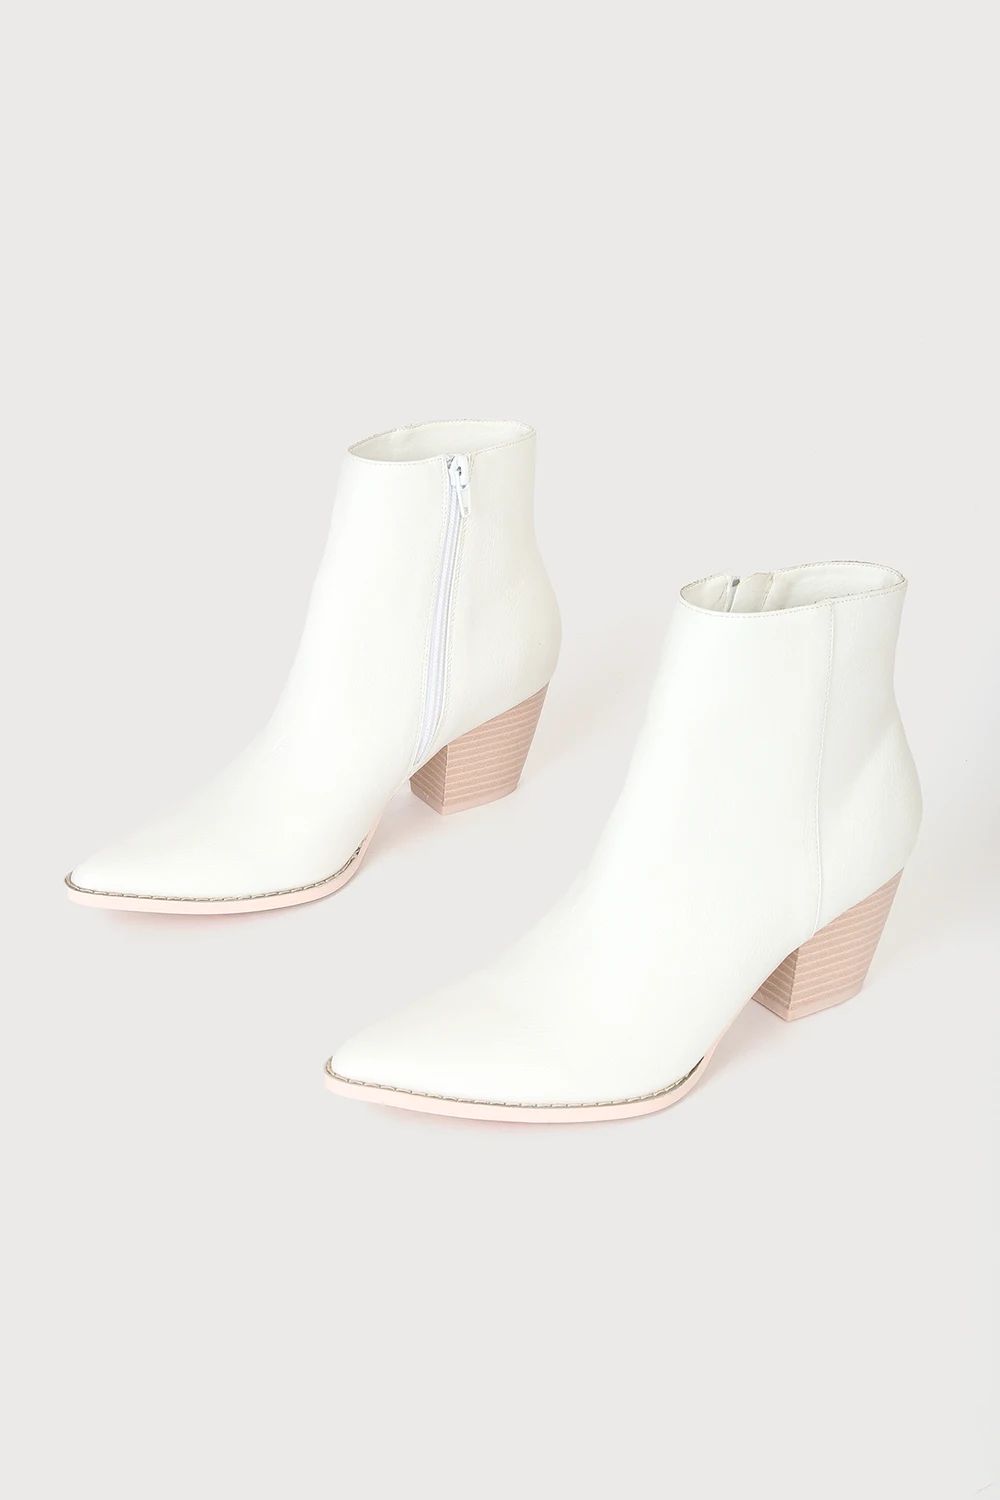 Spirit White and Blonde Pointed Toe Ankle Booties | Lulus (US)